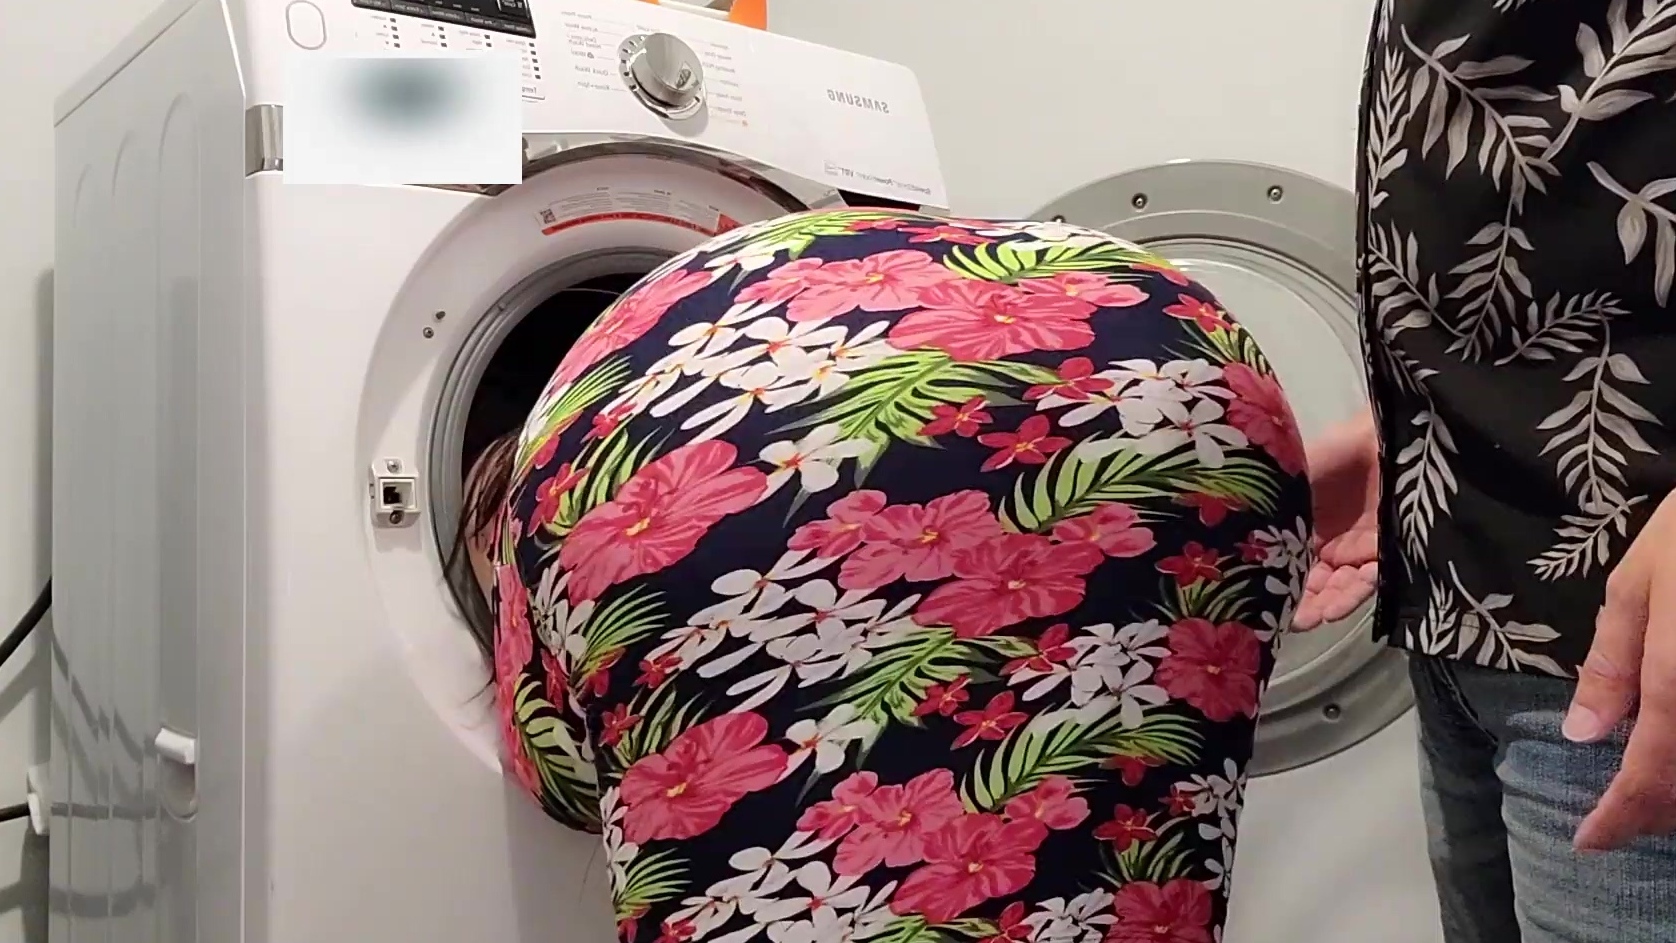 Bitch with huge Ass stuck in washing machine! Perv stepson sprayed cum all over her image